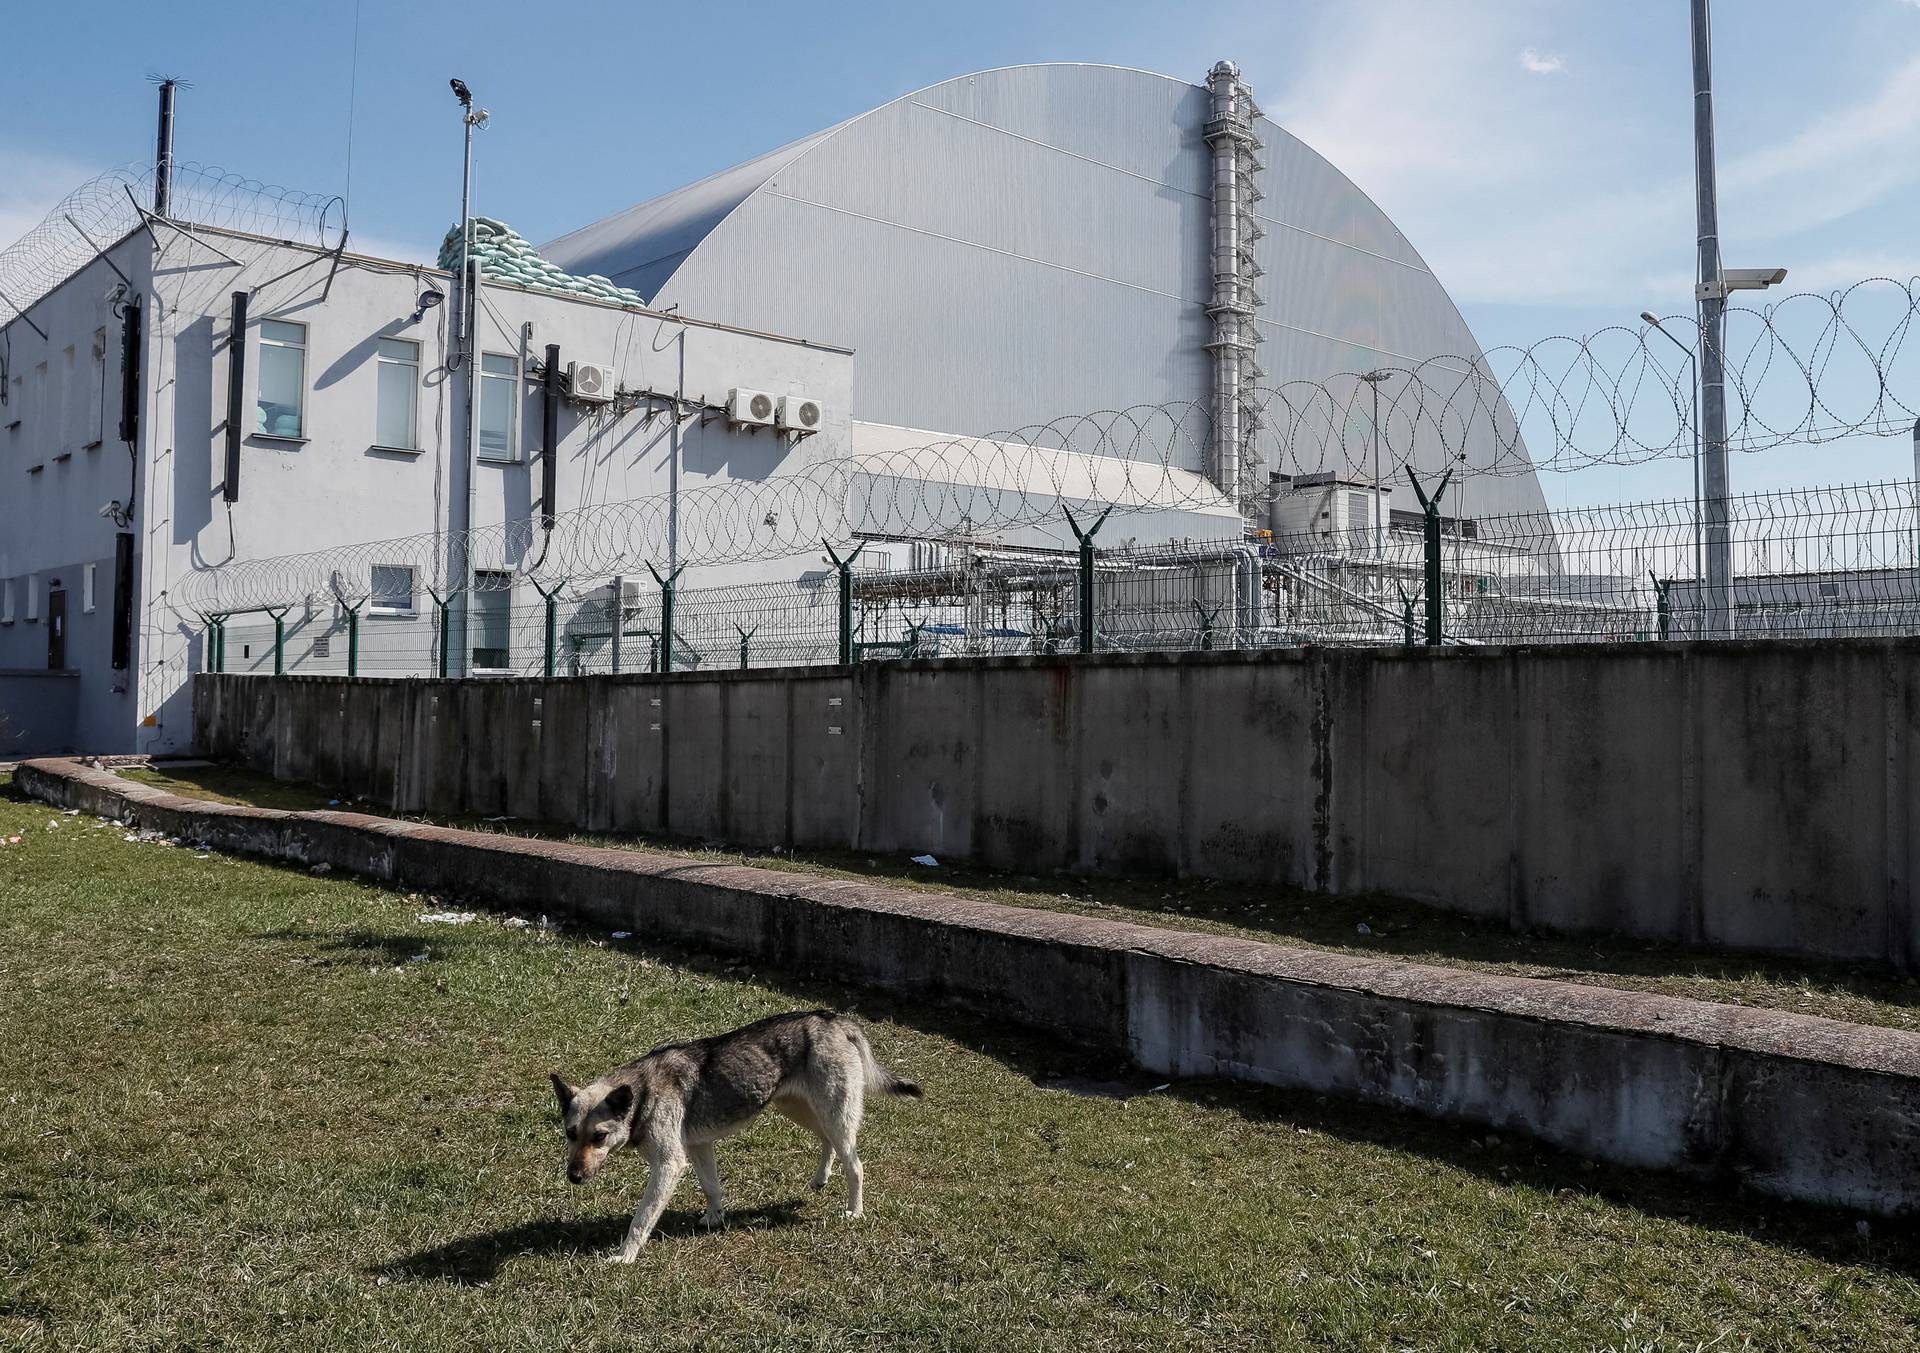 General view of the New Safe Confinement structure over the old sarcophagus covering the damaged fourth reactor at the Chernobyl Nuclear Power Plant, in Chernobyl